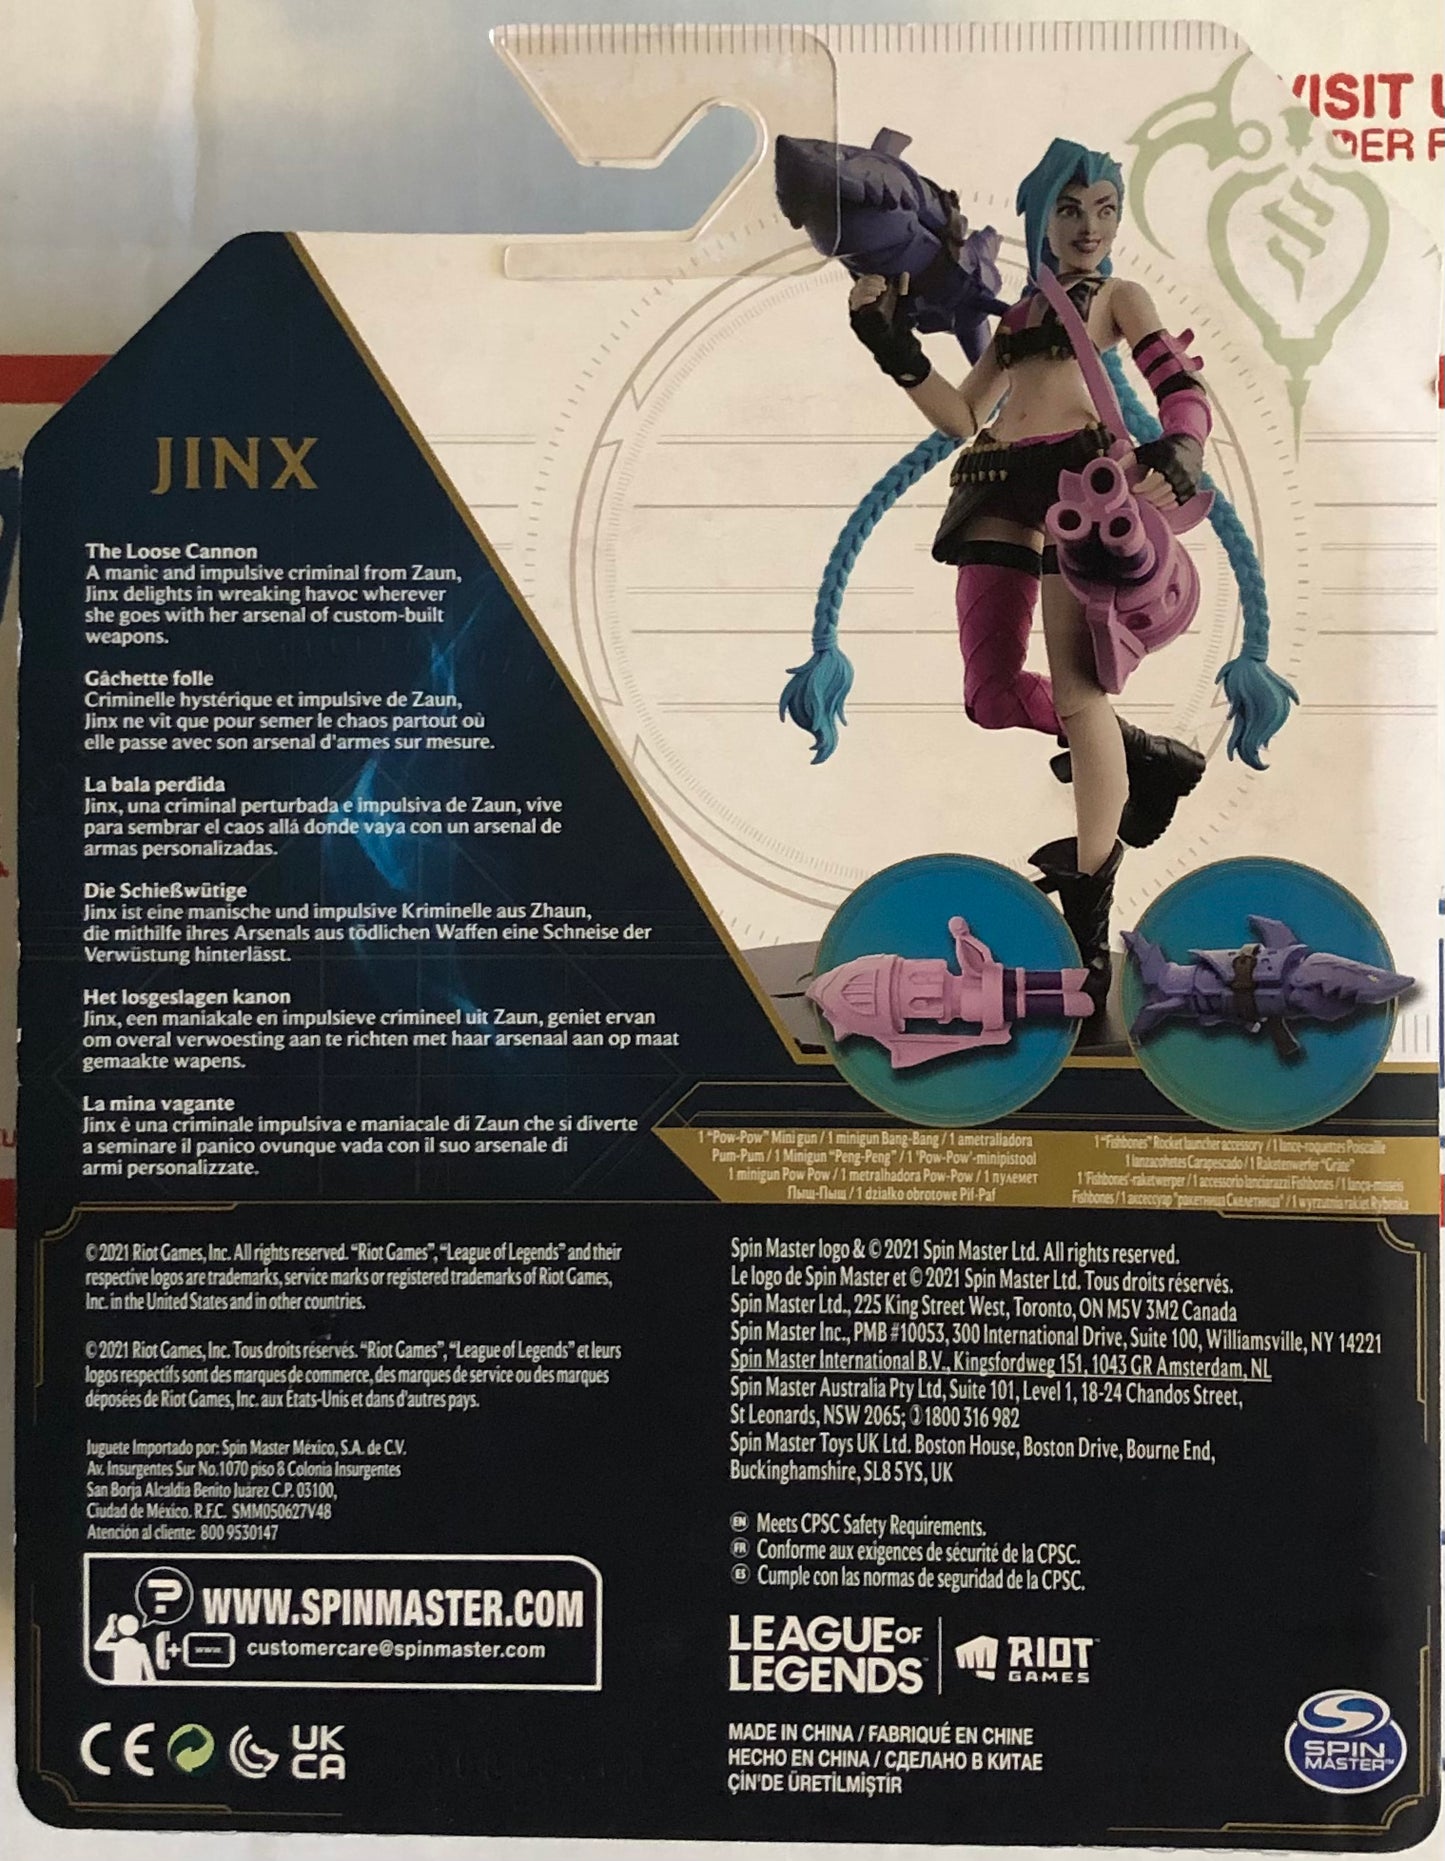 Arcane League of Legends Champion Collection 4” Inch Articulated Jinx Figure (B Condition Box)